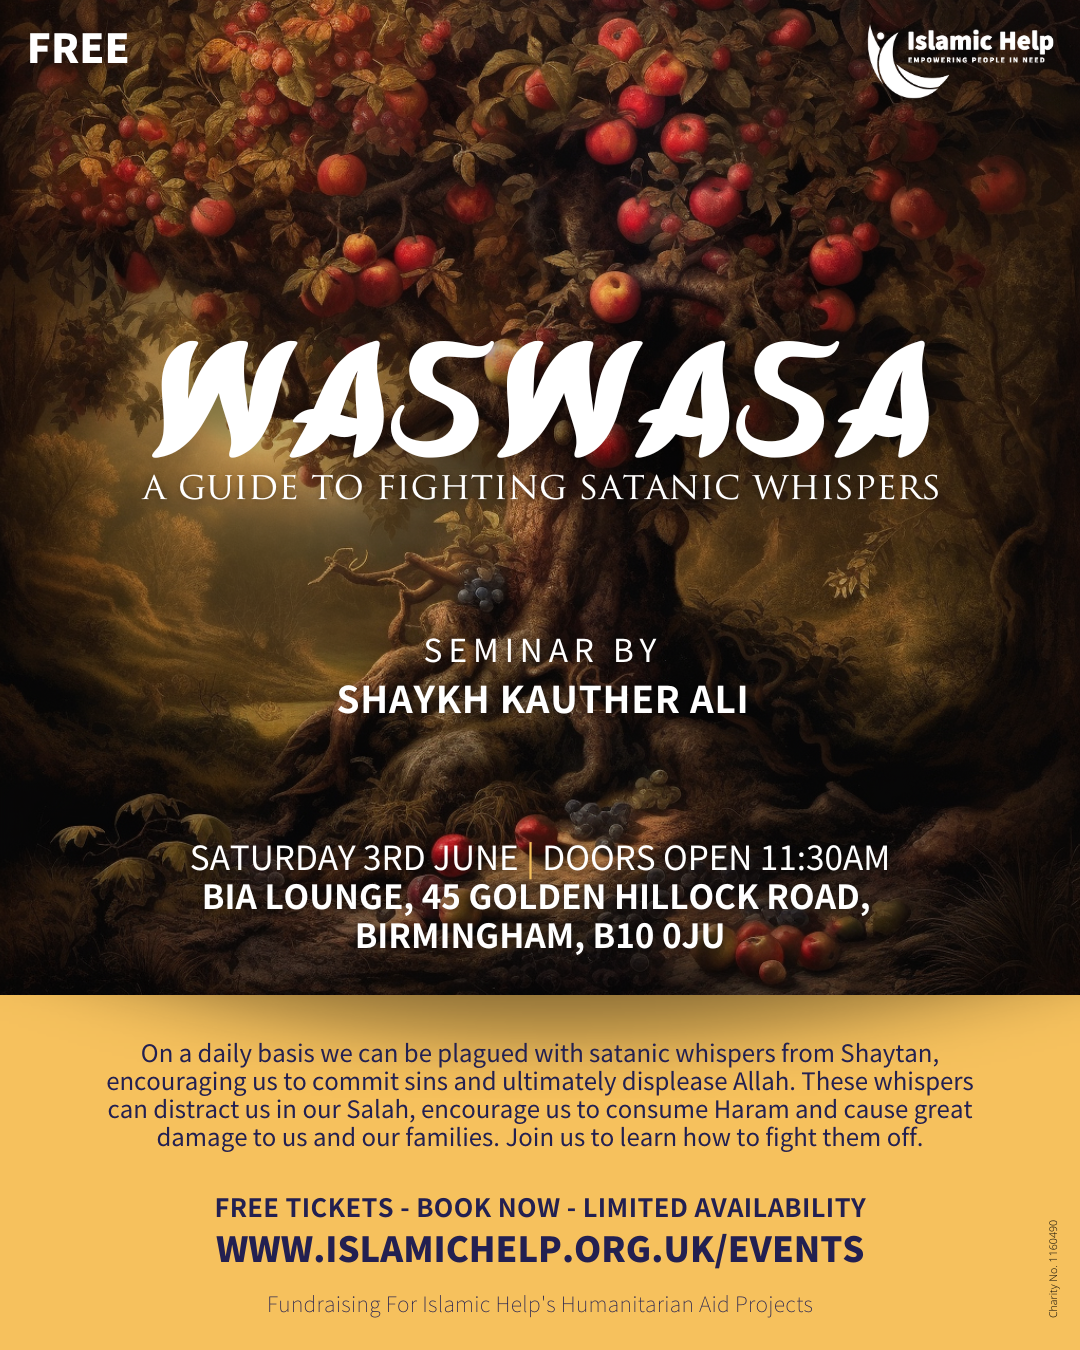 Waswasa – A Guide To Fighting Satanic Whispers